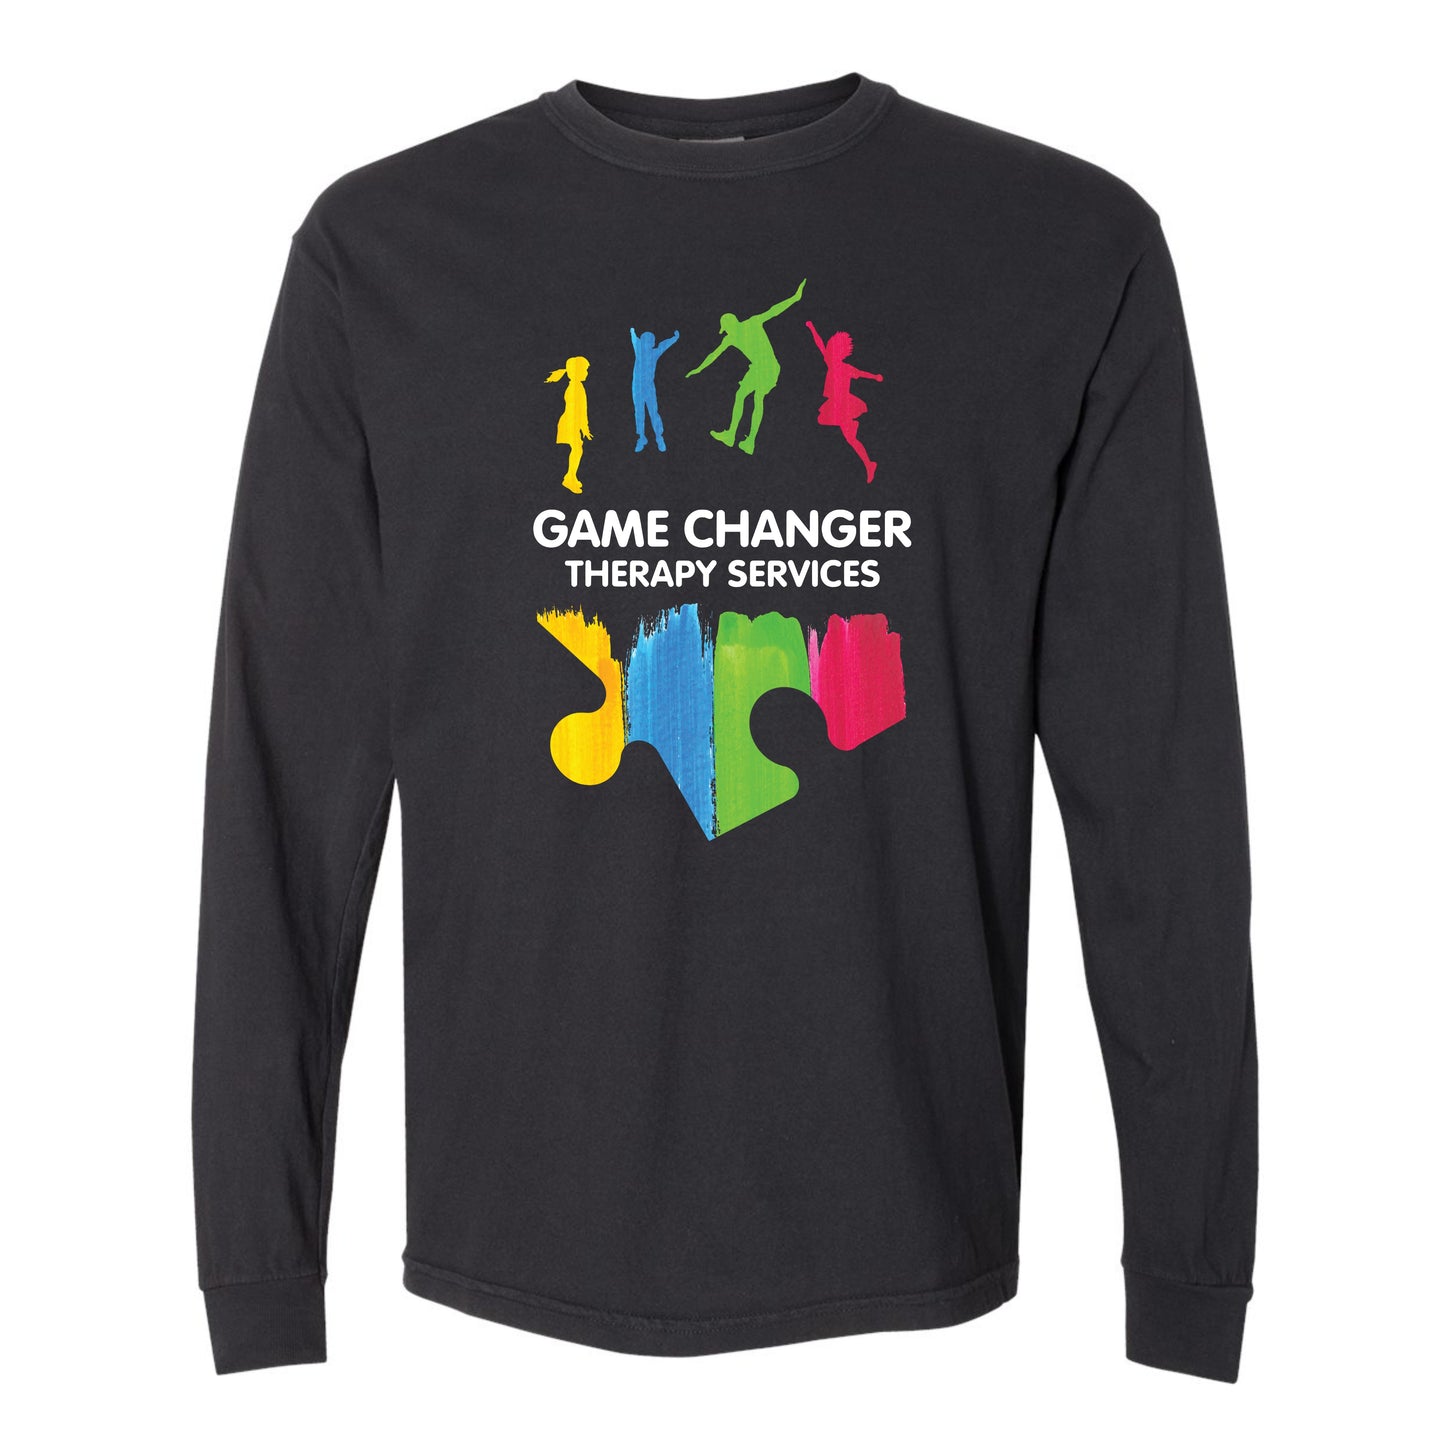 Game Changer Therapy Services Long Sleeve Tee - Full Color Logo